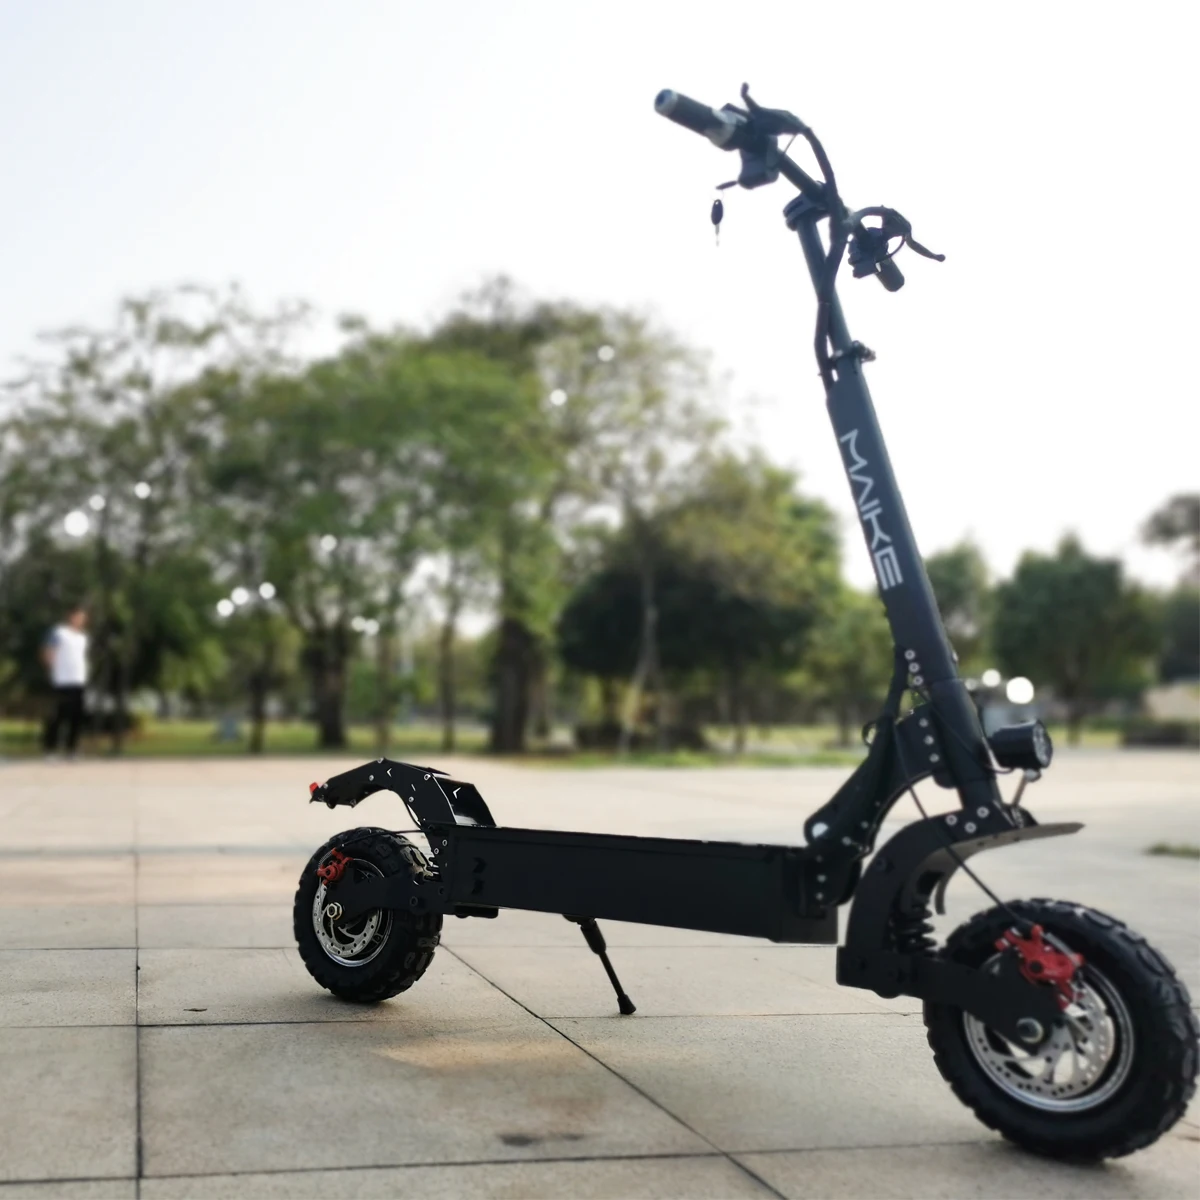 

Factory Price Manufacturer Supplier Maike mk4 1200w motor offroad electric scooter high range 11 inch wide wheel fast e scooter